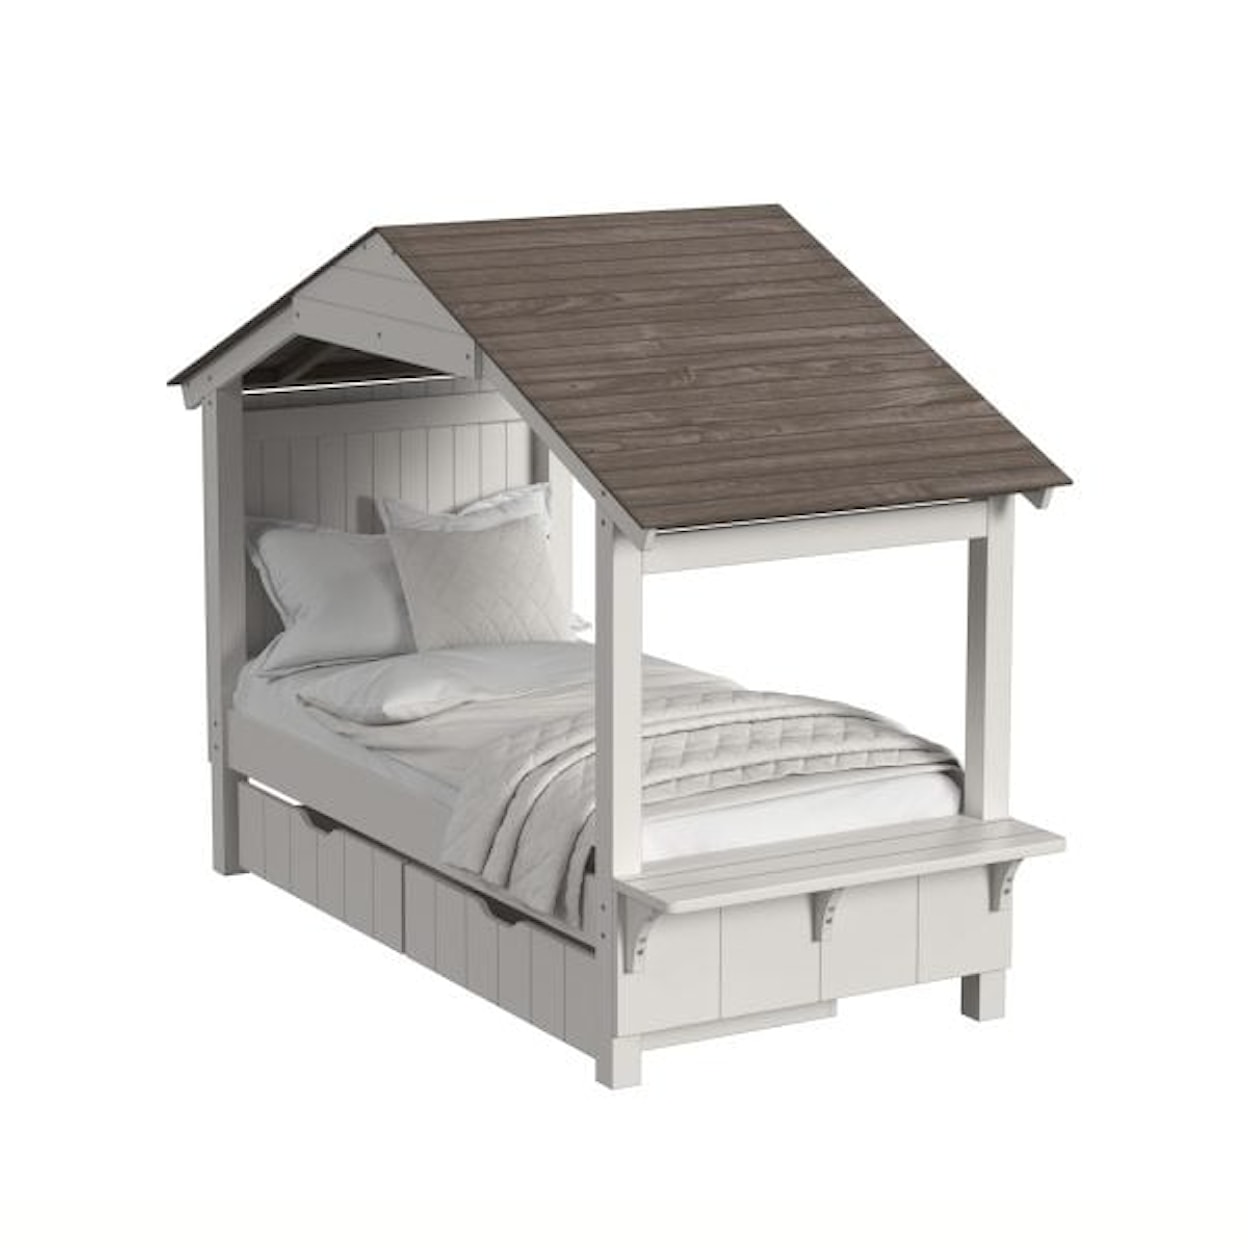 Westwood Design Lodge Series Complete Twin Bed Full Roof